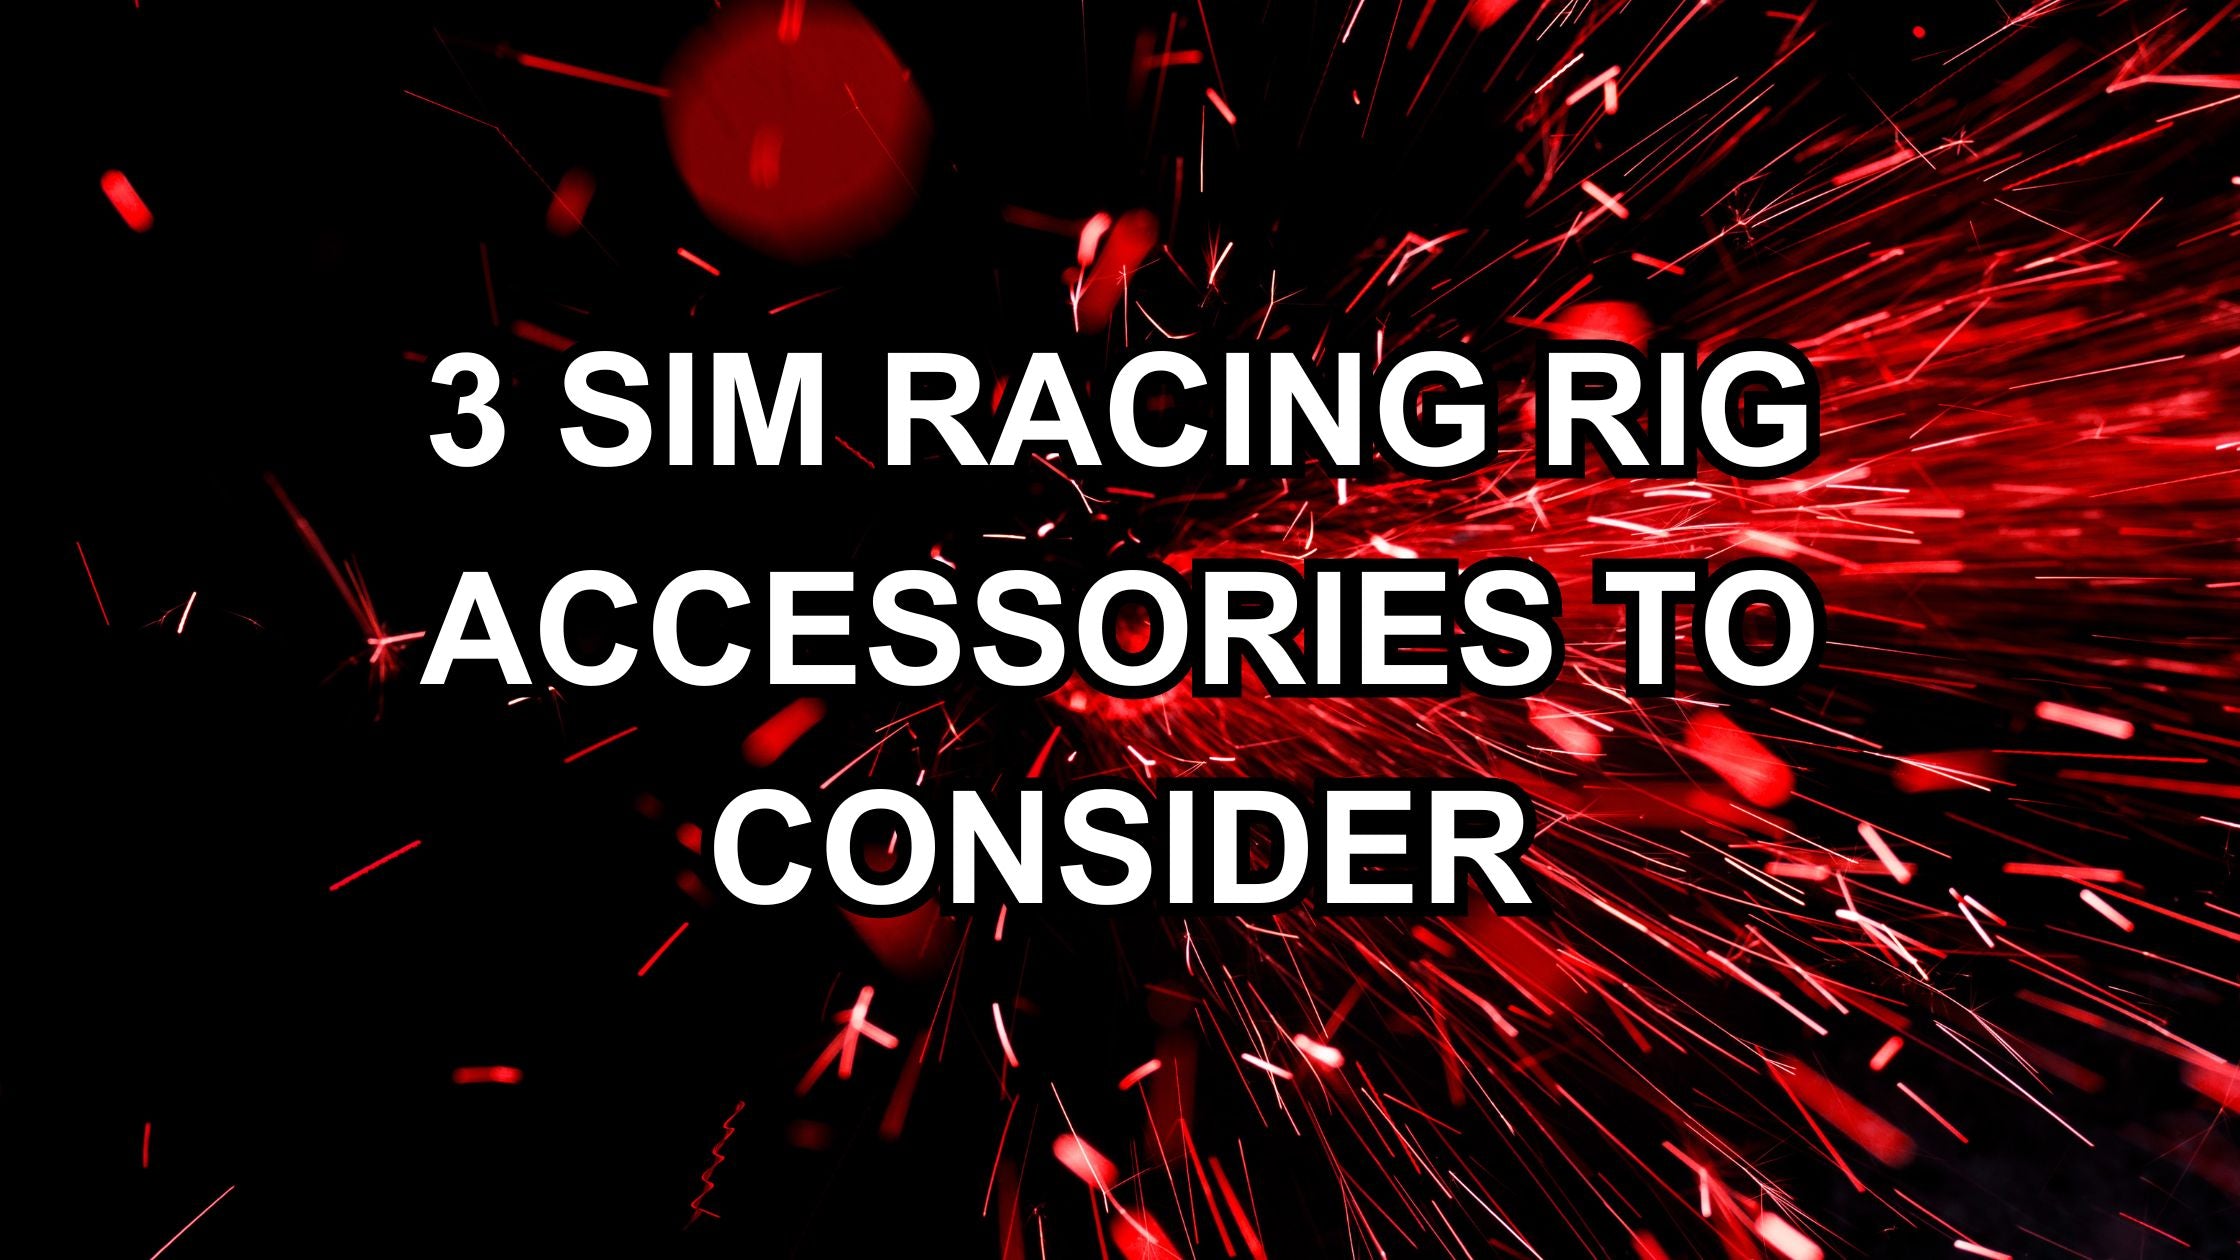 3 Sim Racing Rig Accessories to Consider